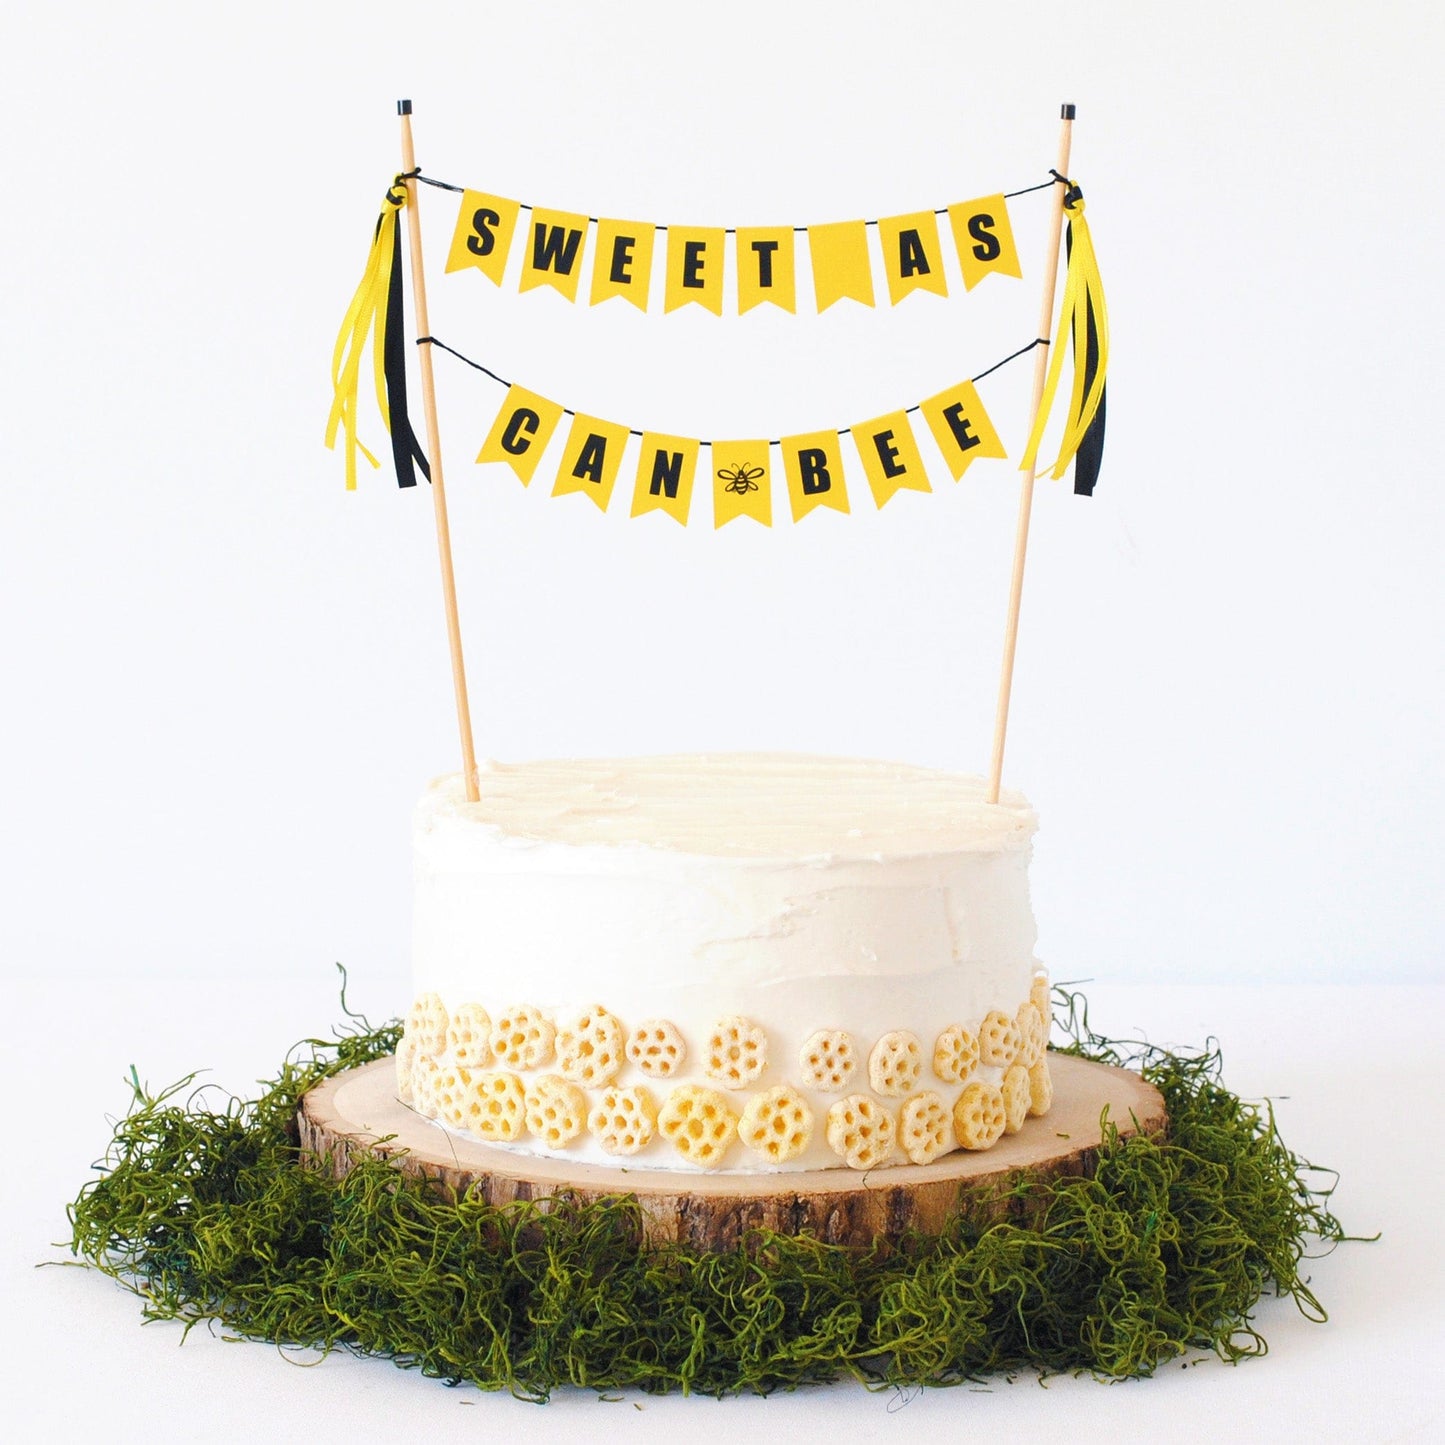 Bee Cake Topper 